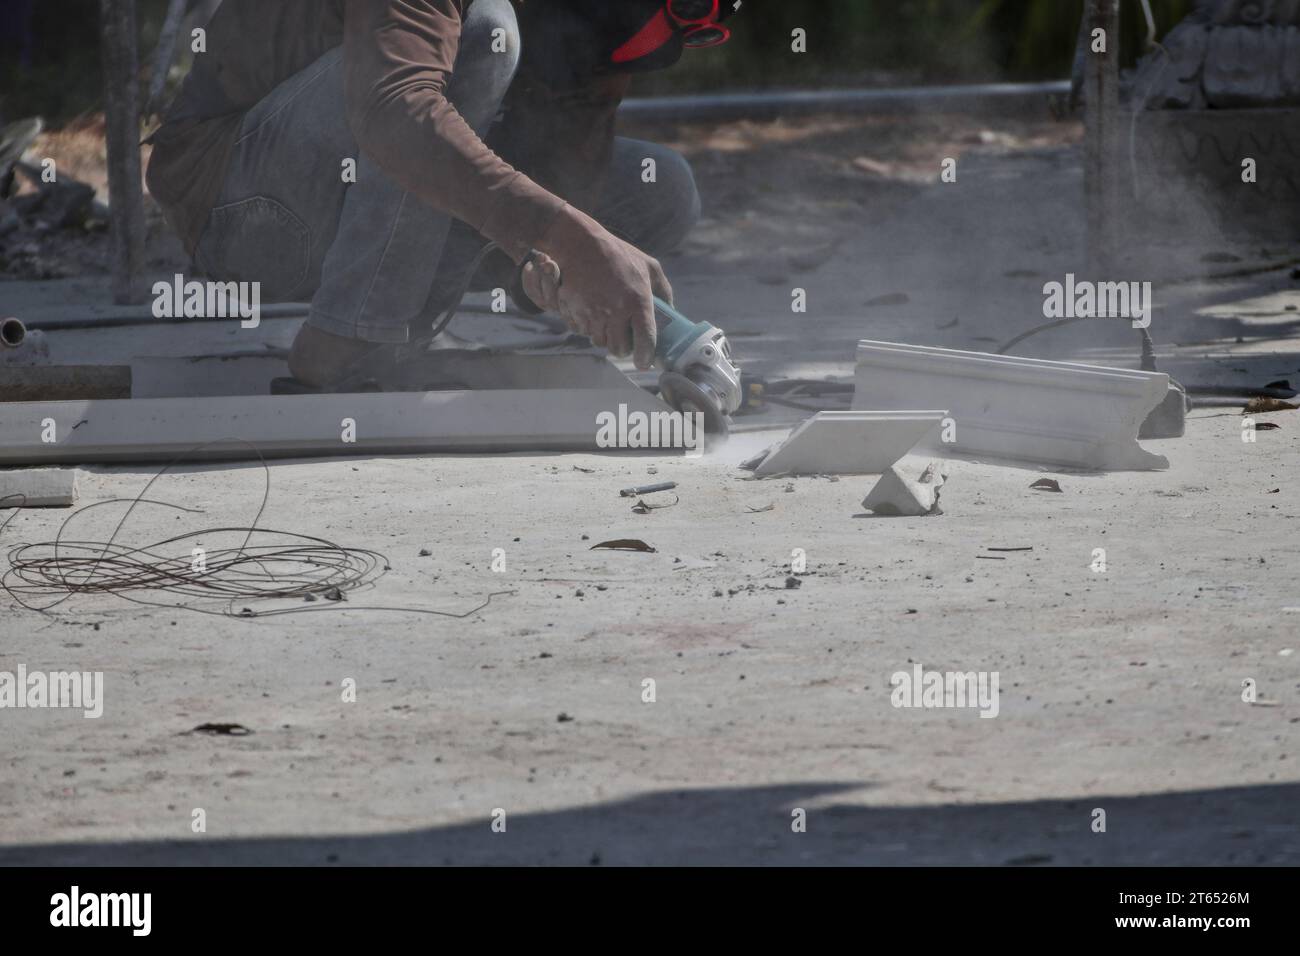 Workers are using grinding stones to cut cement blocks. Causing smoke and dust to cloud over the area Stock Photo